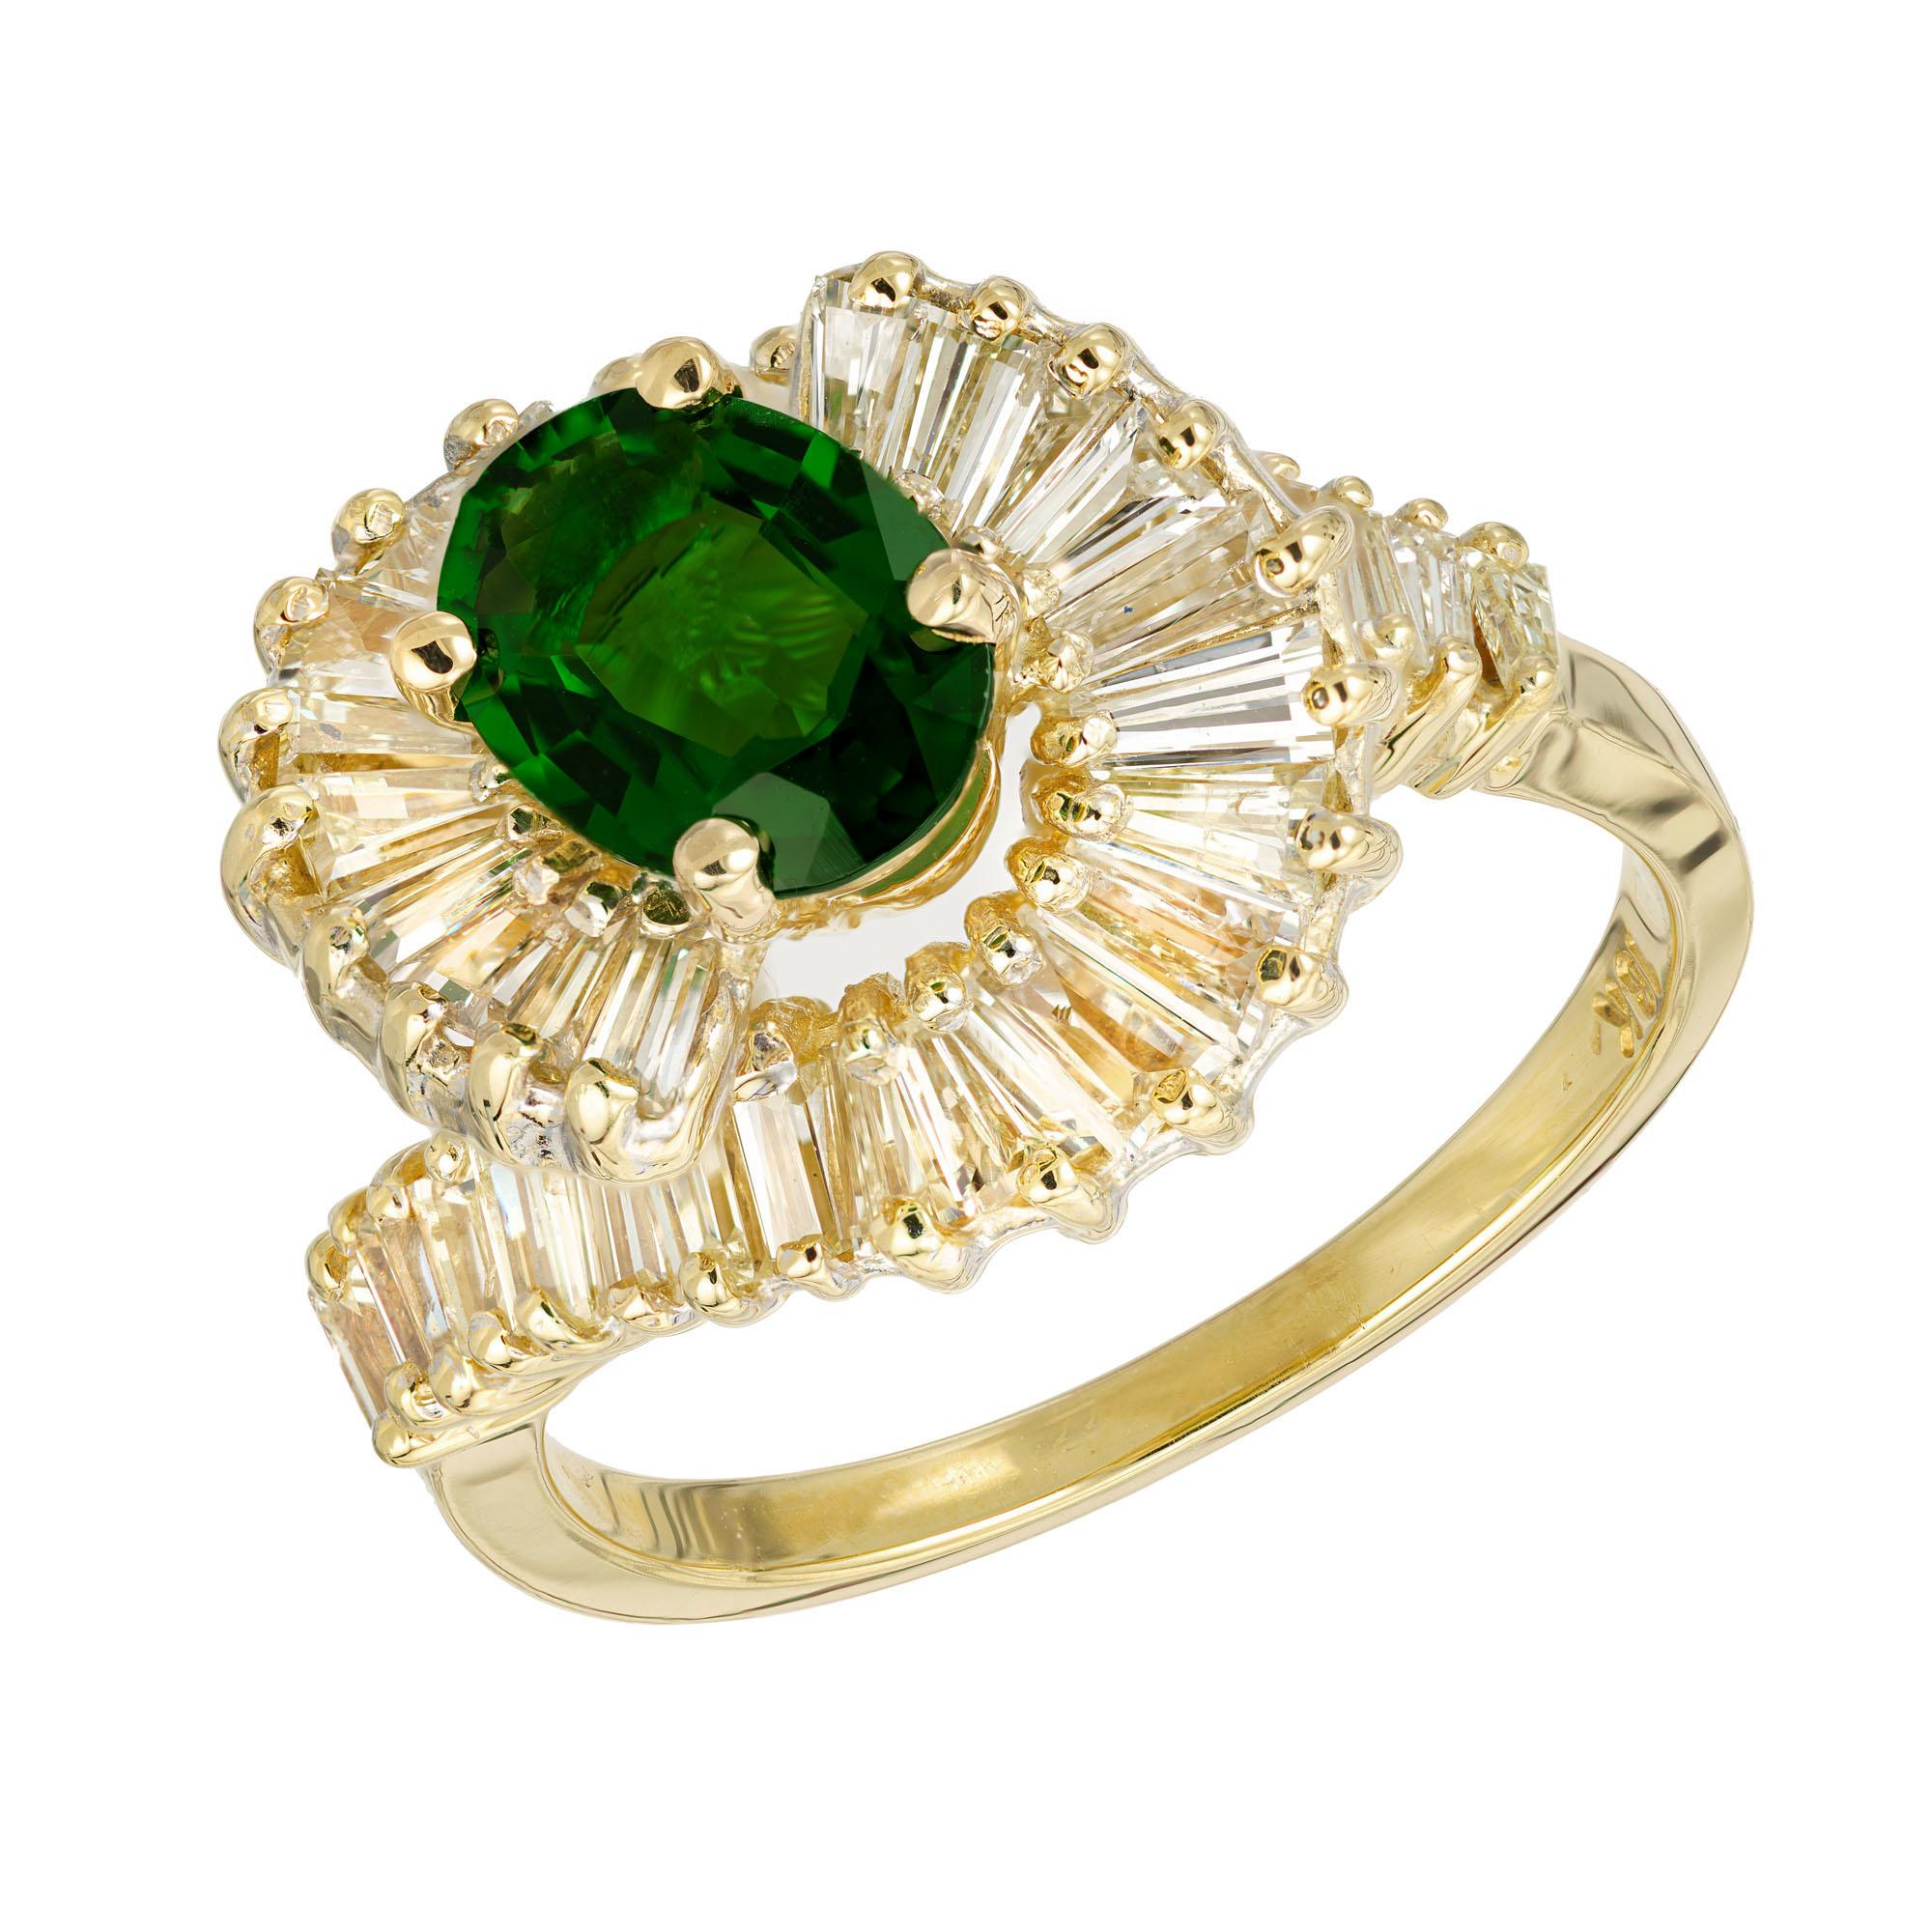 Chrome Tourmaline and diamond swirl design cocktail ring. .97ct. oval tourmaline center stone with a halo of tapered baguette cut diamonds in a 18k yellow gold setting. Circa 1960's.  

1 oval green tourmaline, VS approx. .97cts
38 tapered baguette